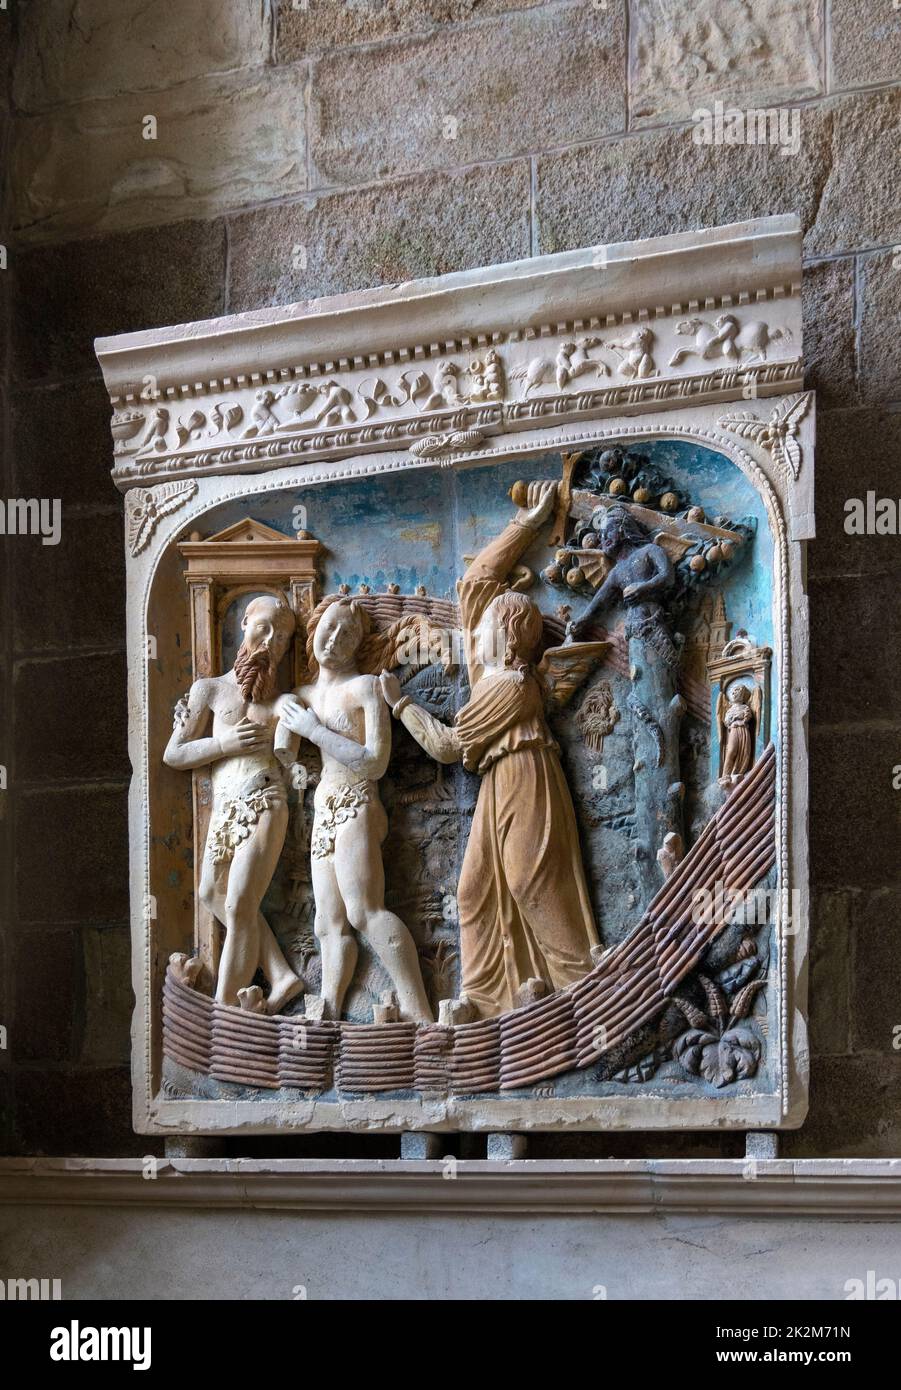 Ancient bas-relief carving of biblical scenes in the monastry of Le Mont Saint-Michel, a Unesco World Heritage Site, Normandy, France, Europe. Stock Photo